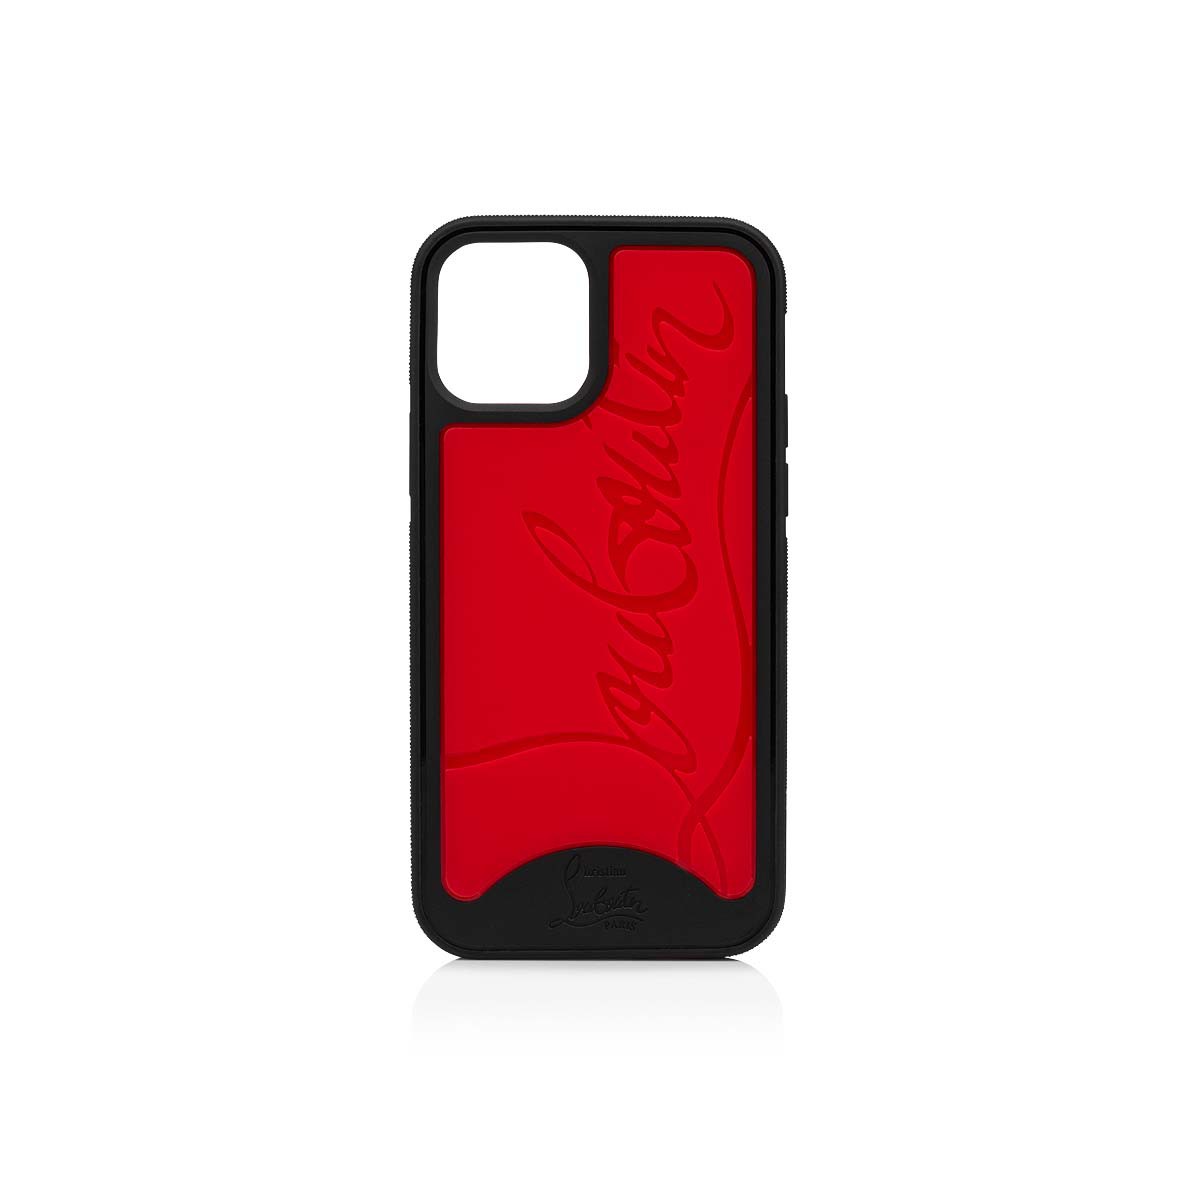 LOUBIPHONE SNEAKERS CASE IPHONE 12/12 PRO - スモールレザーグッズ -